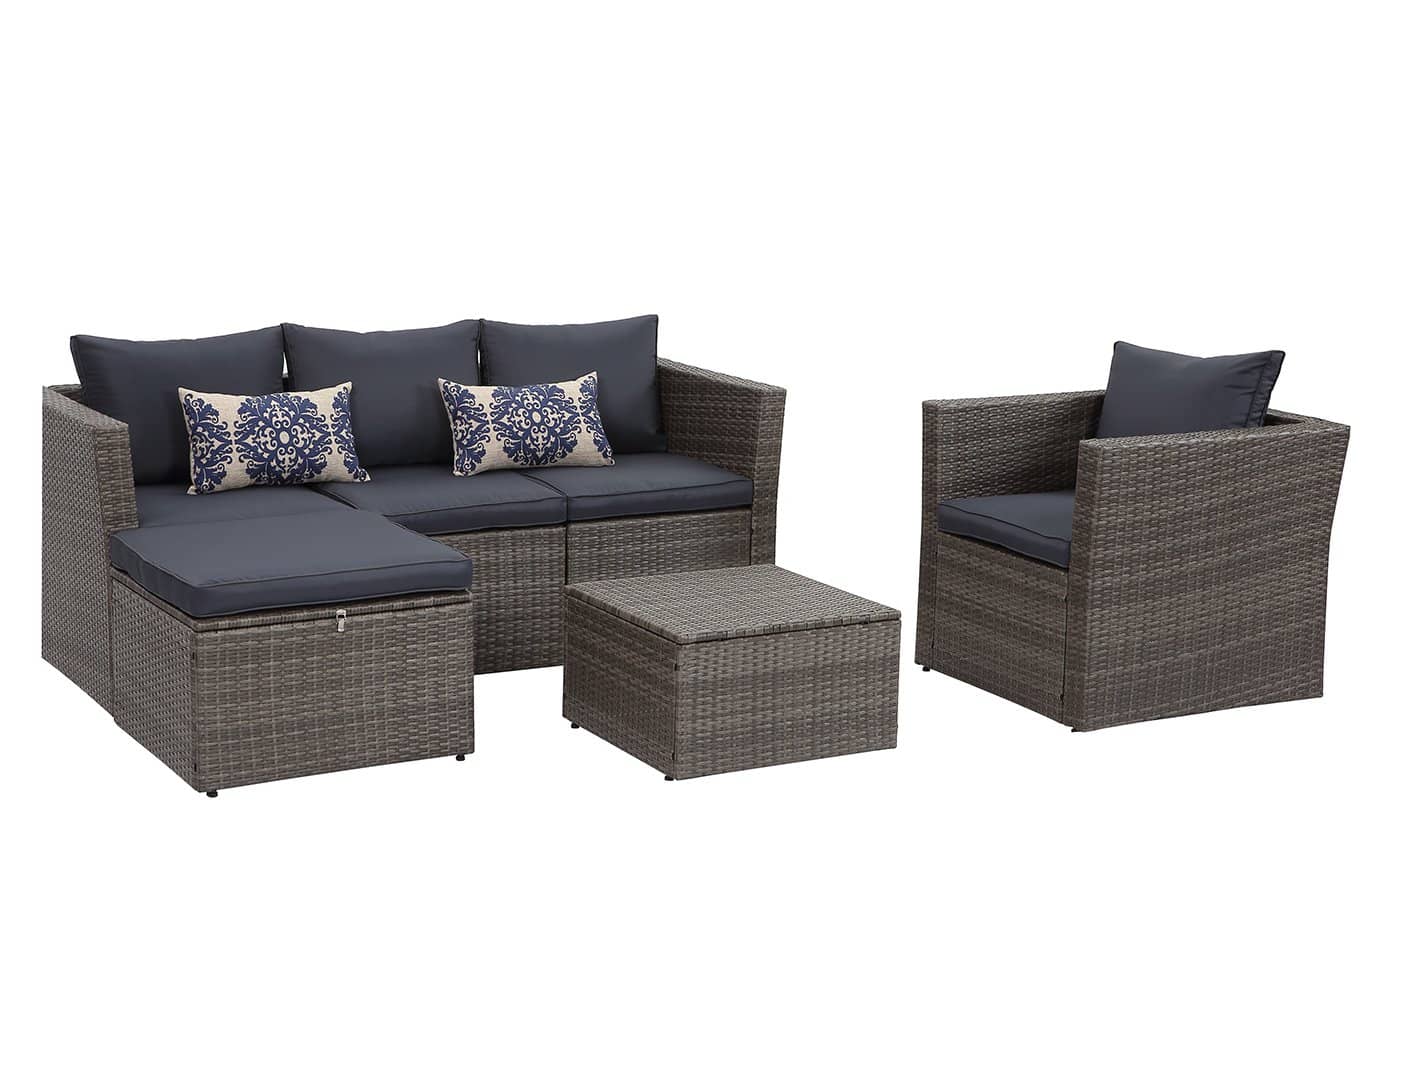 Context Brisk 6 Piece All Weather Wicker Sofa Seating Group with Cushions, Ottoman with Storage and Coffee Table - Navy